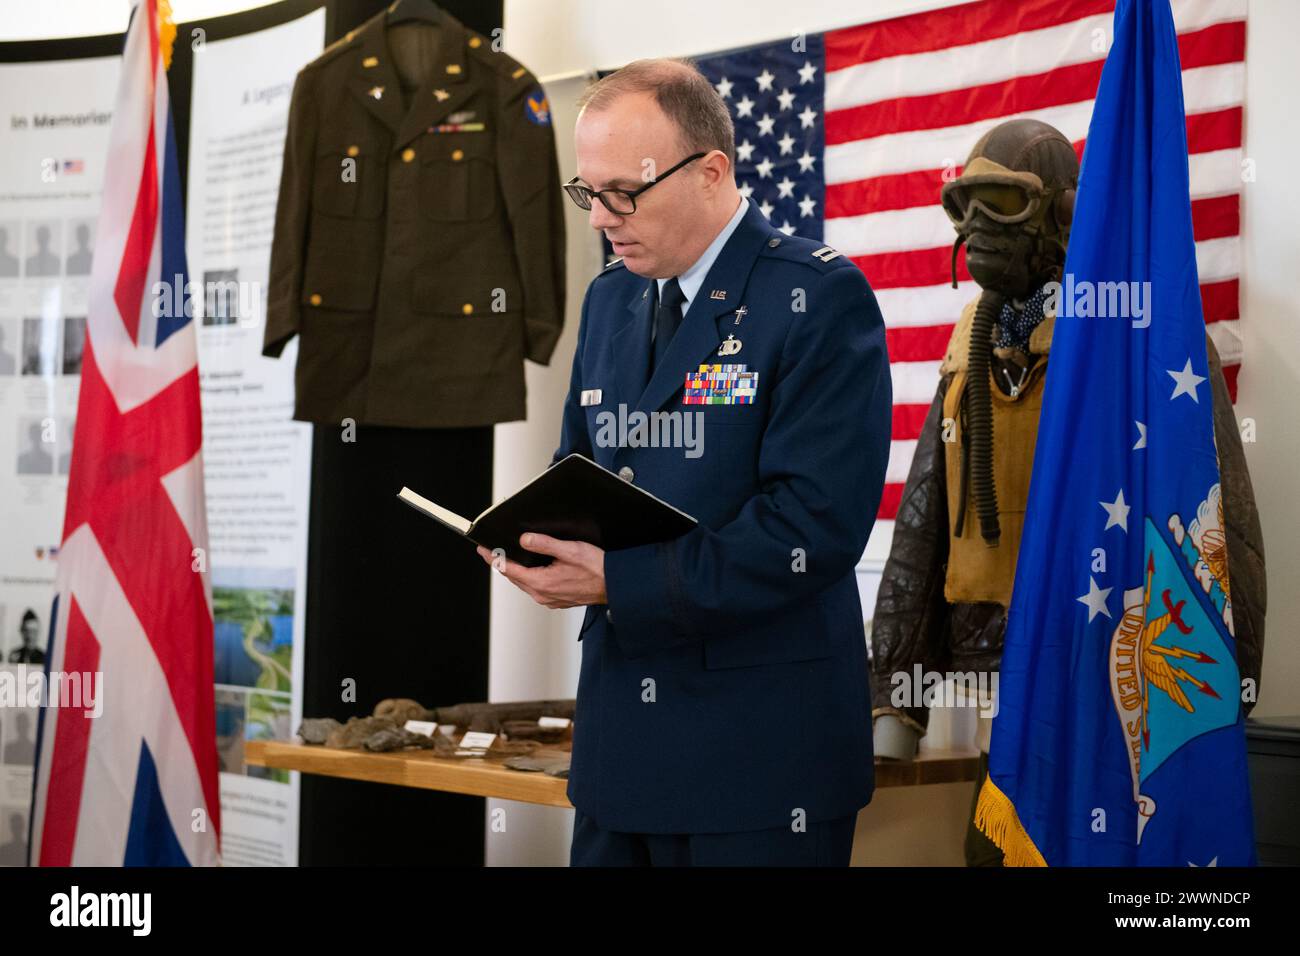 U.S. Air Force Chaplain (Capt) Steven Davis, 501st Combat Support Wing chaplain, delivers an invocation during a Ceremony of Remembrance at Stanwick Lakes, England, Feb. 22, 2024. U.S. and U.K. leaders gathered to honor 17 Airmen who died in a midair collision on Feb. 22, 1944, involving B-17 Flying Fortresses from the 303rd Bombardment Group at RAF Molesworth and the 384th Bombardment Group at RAF Grafton Underwood. The Airmen were part of Operation Argument, or 'The Big Week,' targeting enemy industrial sites and aircraft facilities in Central Europe to secure Allied air superiority for the Stock Photo